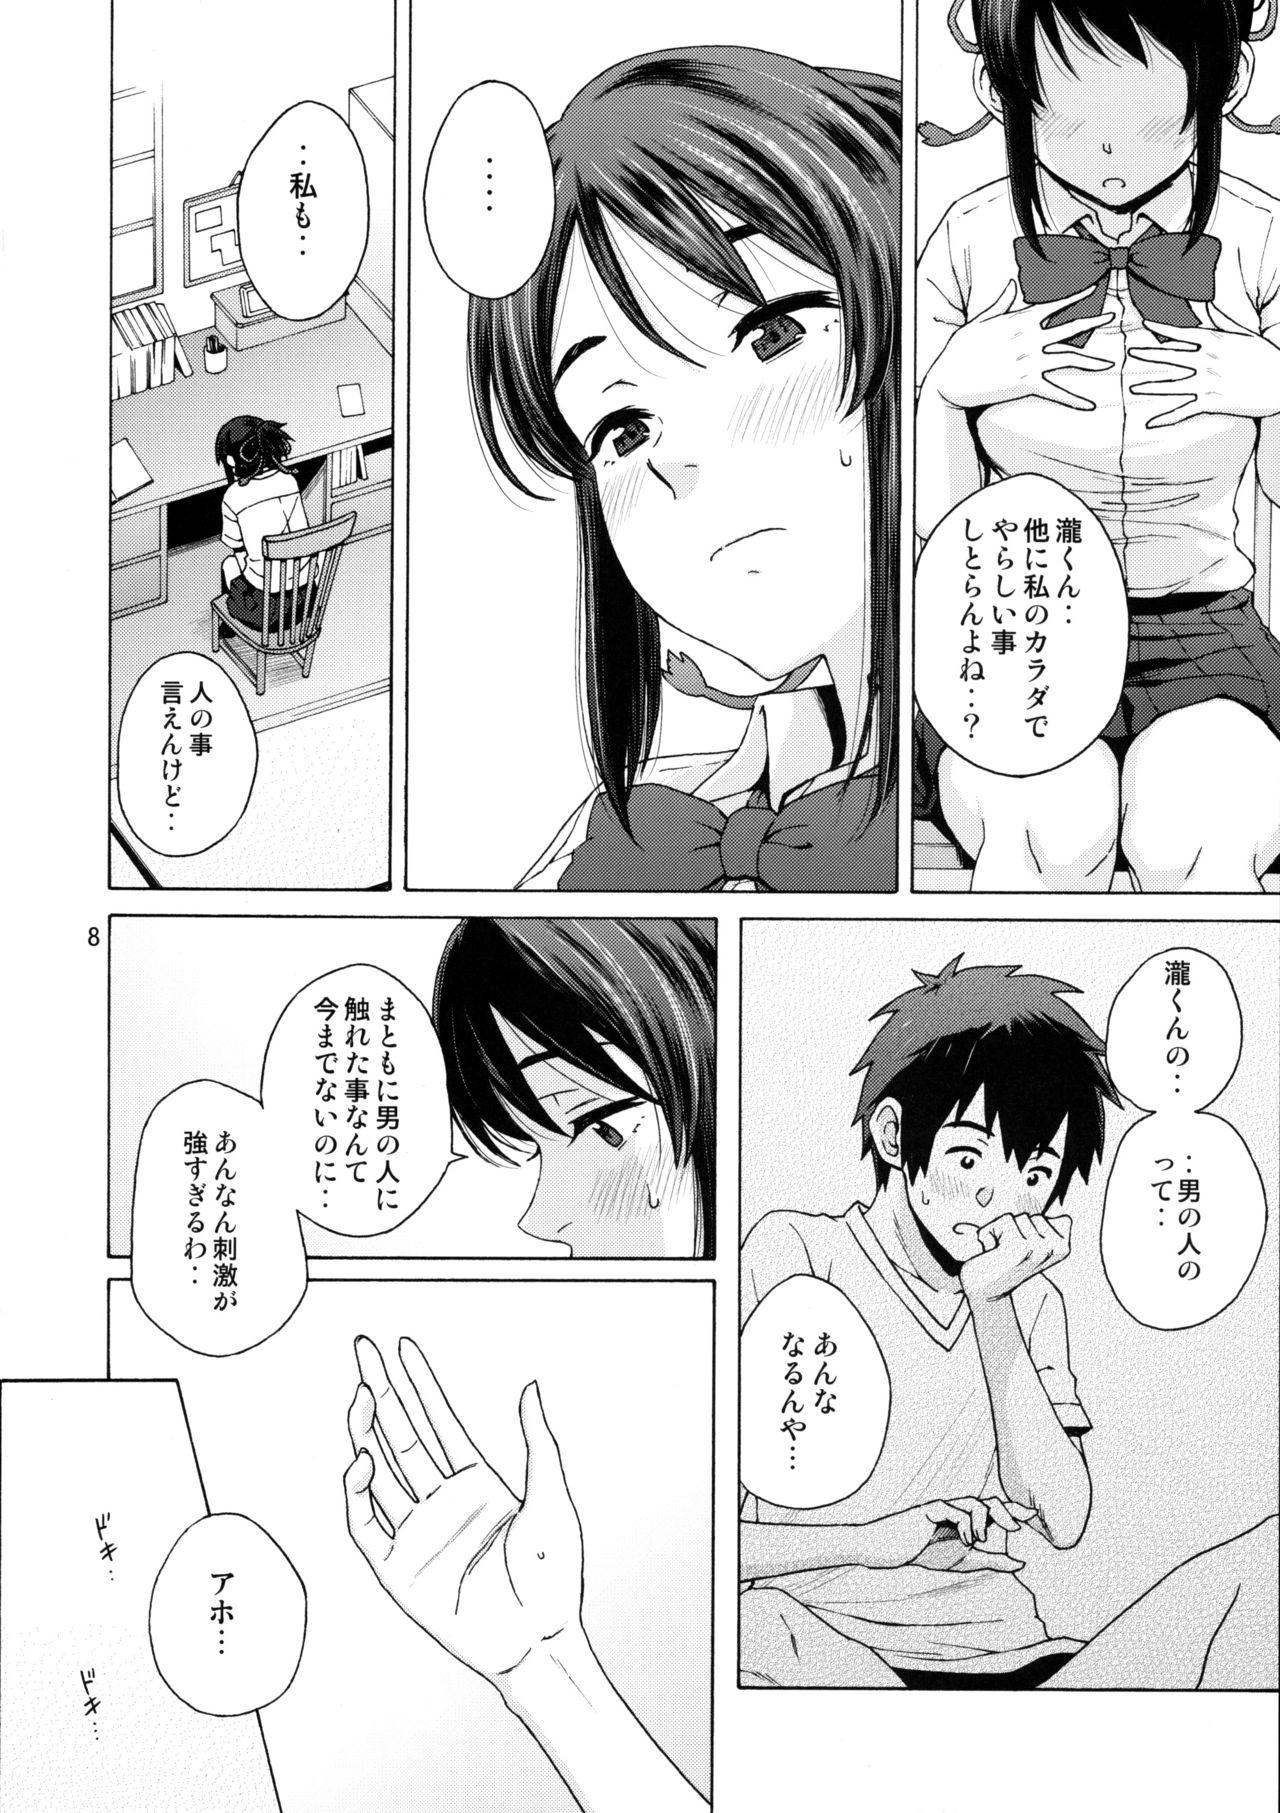 Trimmed & and & - Kimi no na wa. Round Ass - Page 7